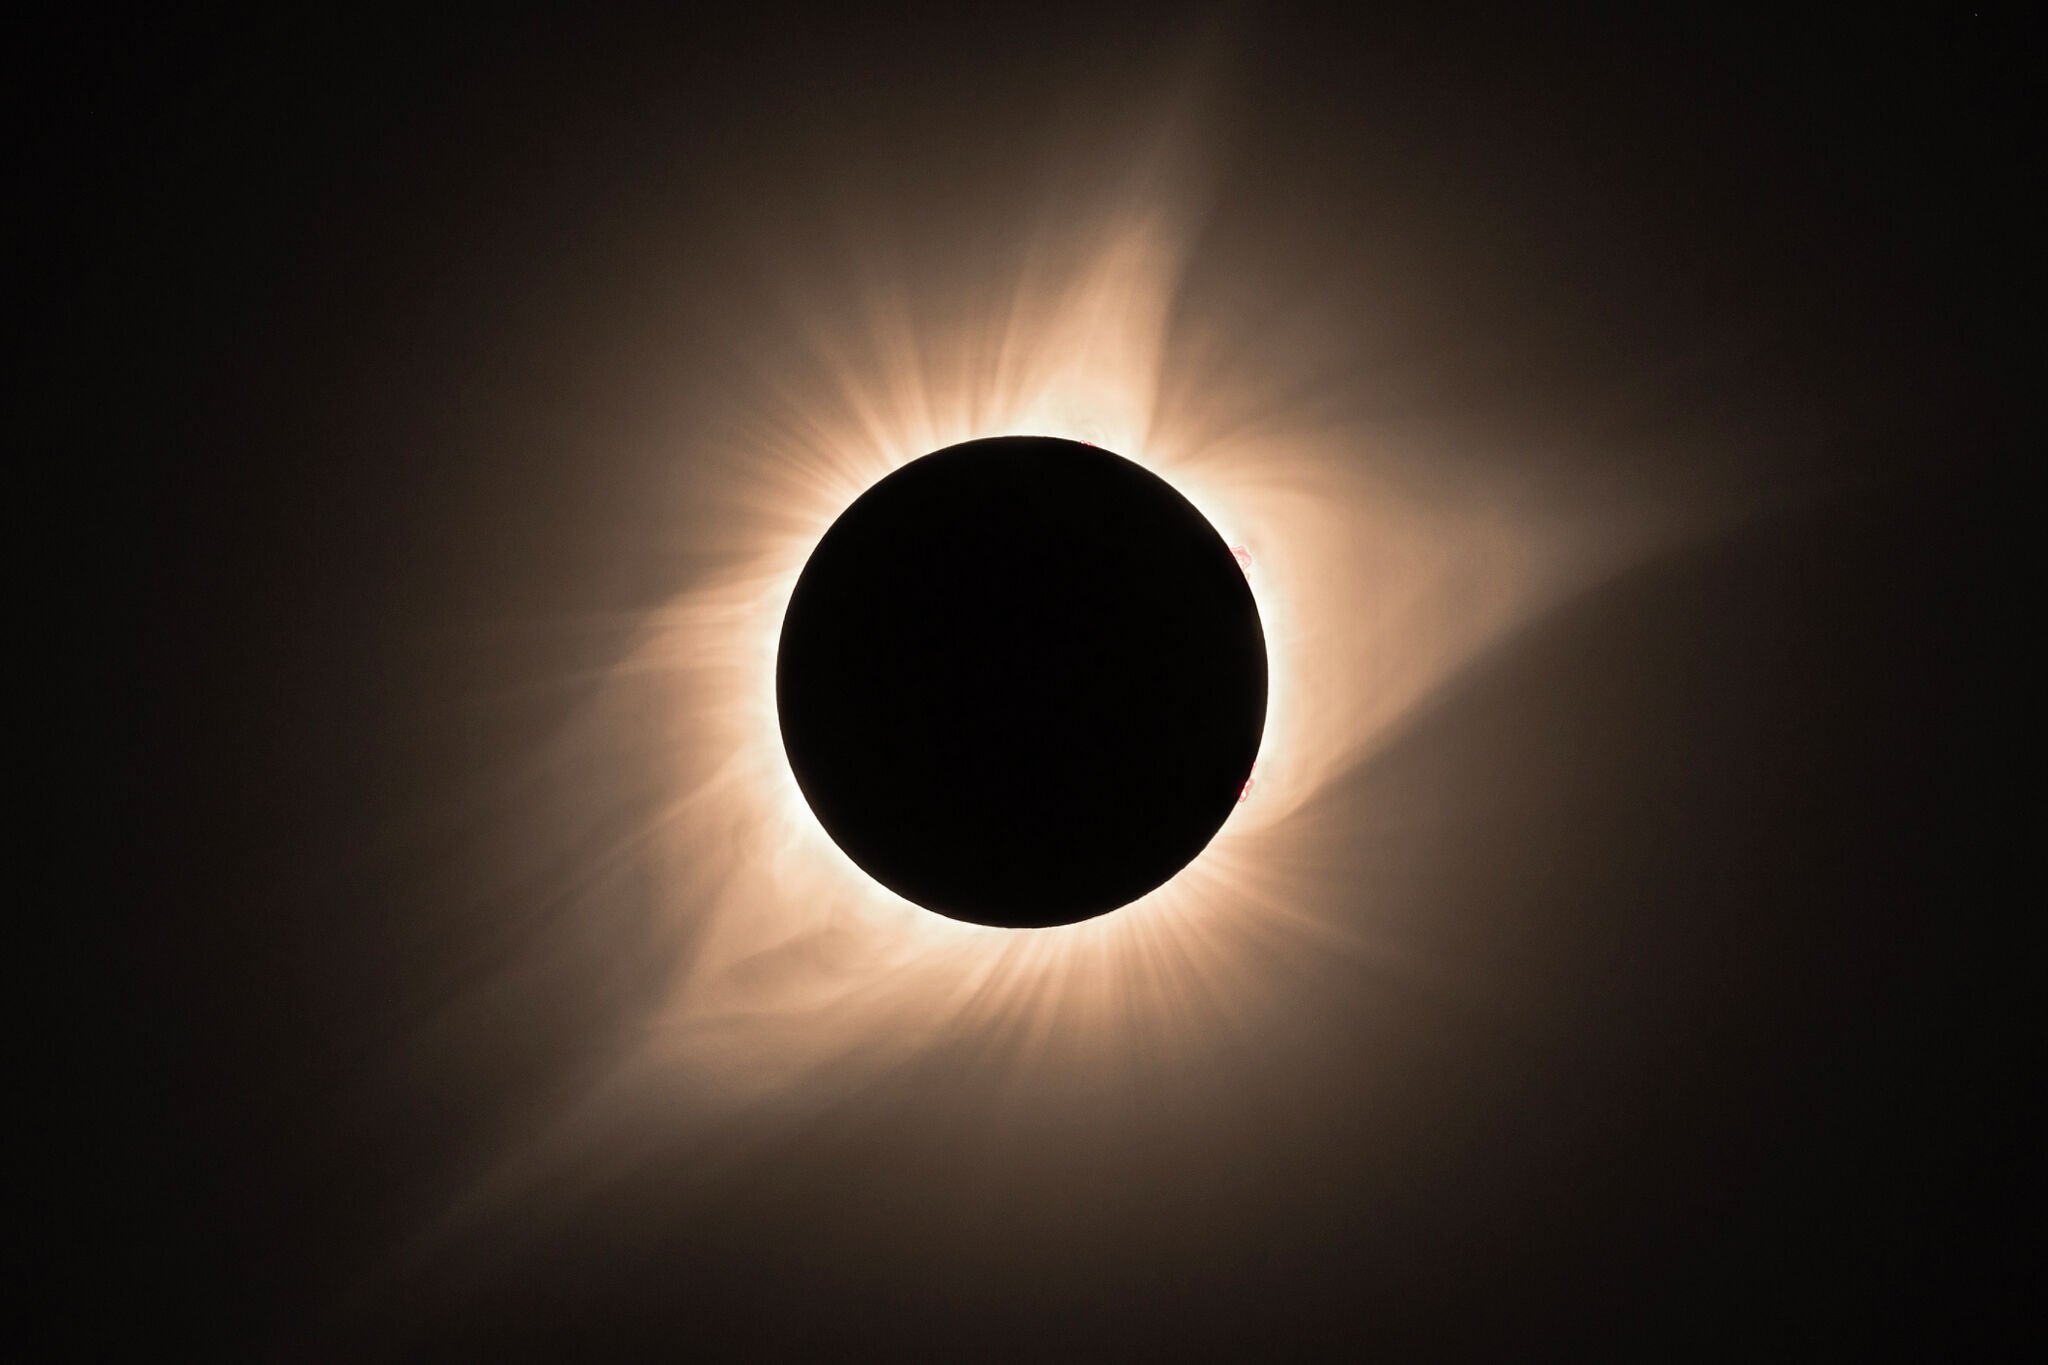 What to know about April's total solar eclipse in Texas